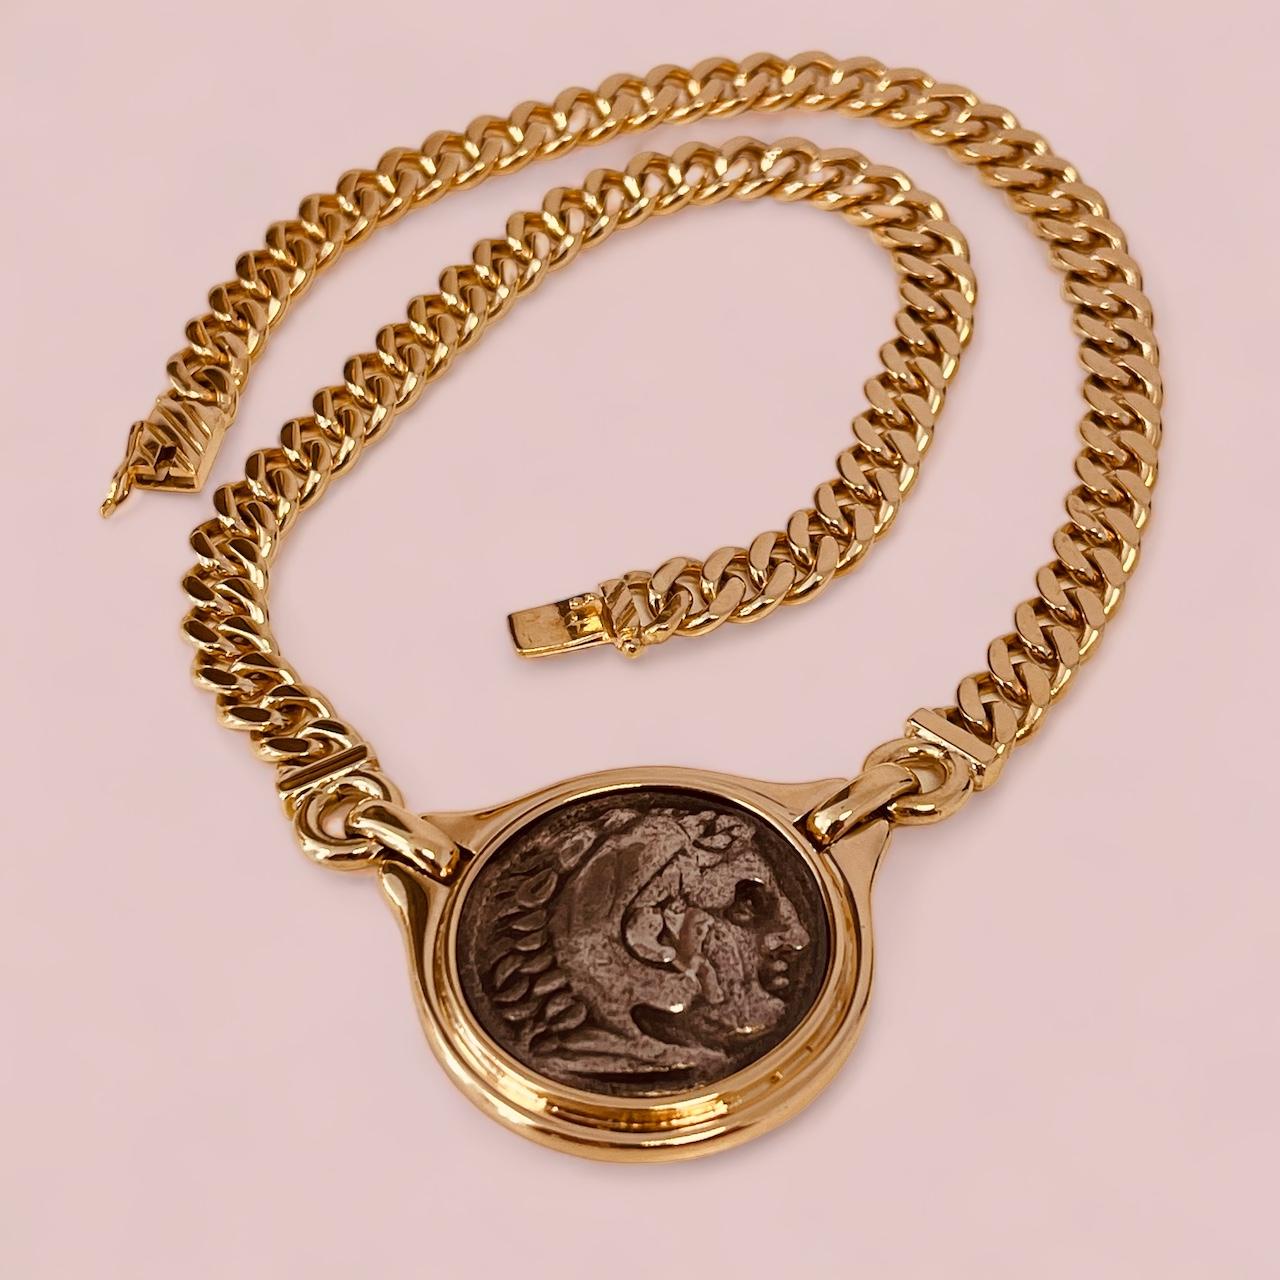 Women's 18ct Gold Link Necklace Centring A Reproduction Of An Antique Greek Silver Coin For Sale